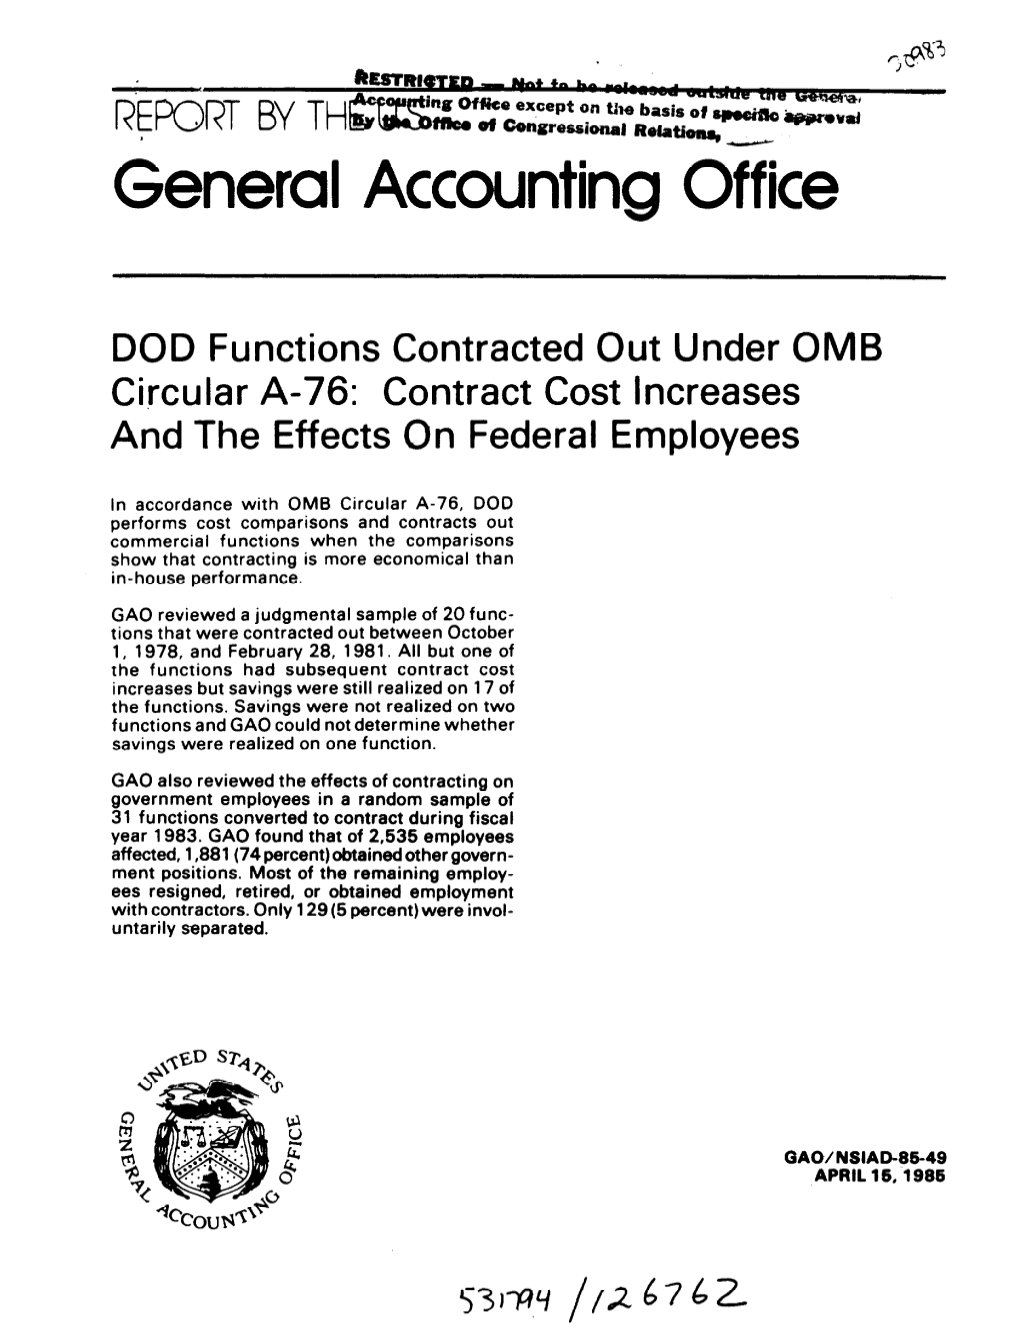 NSIAD-85-49 DOD Functions Contracted out Under OMB Circular A-76